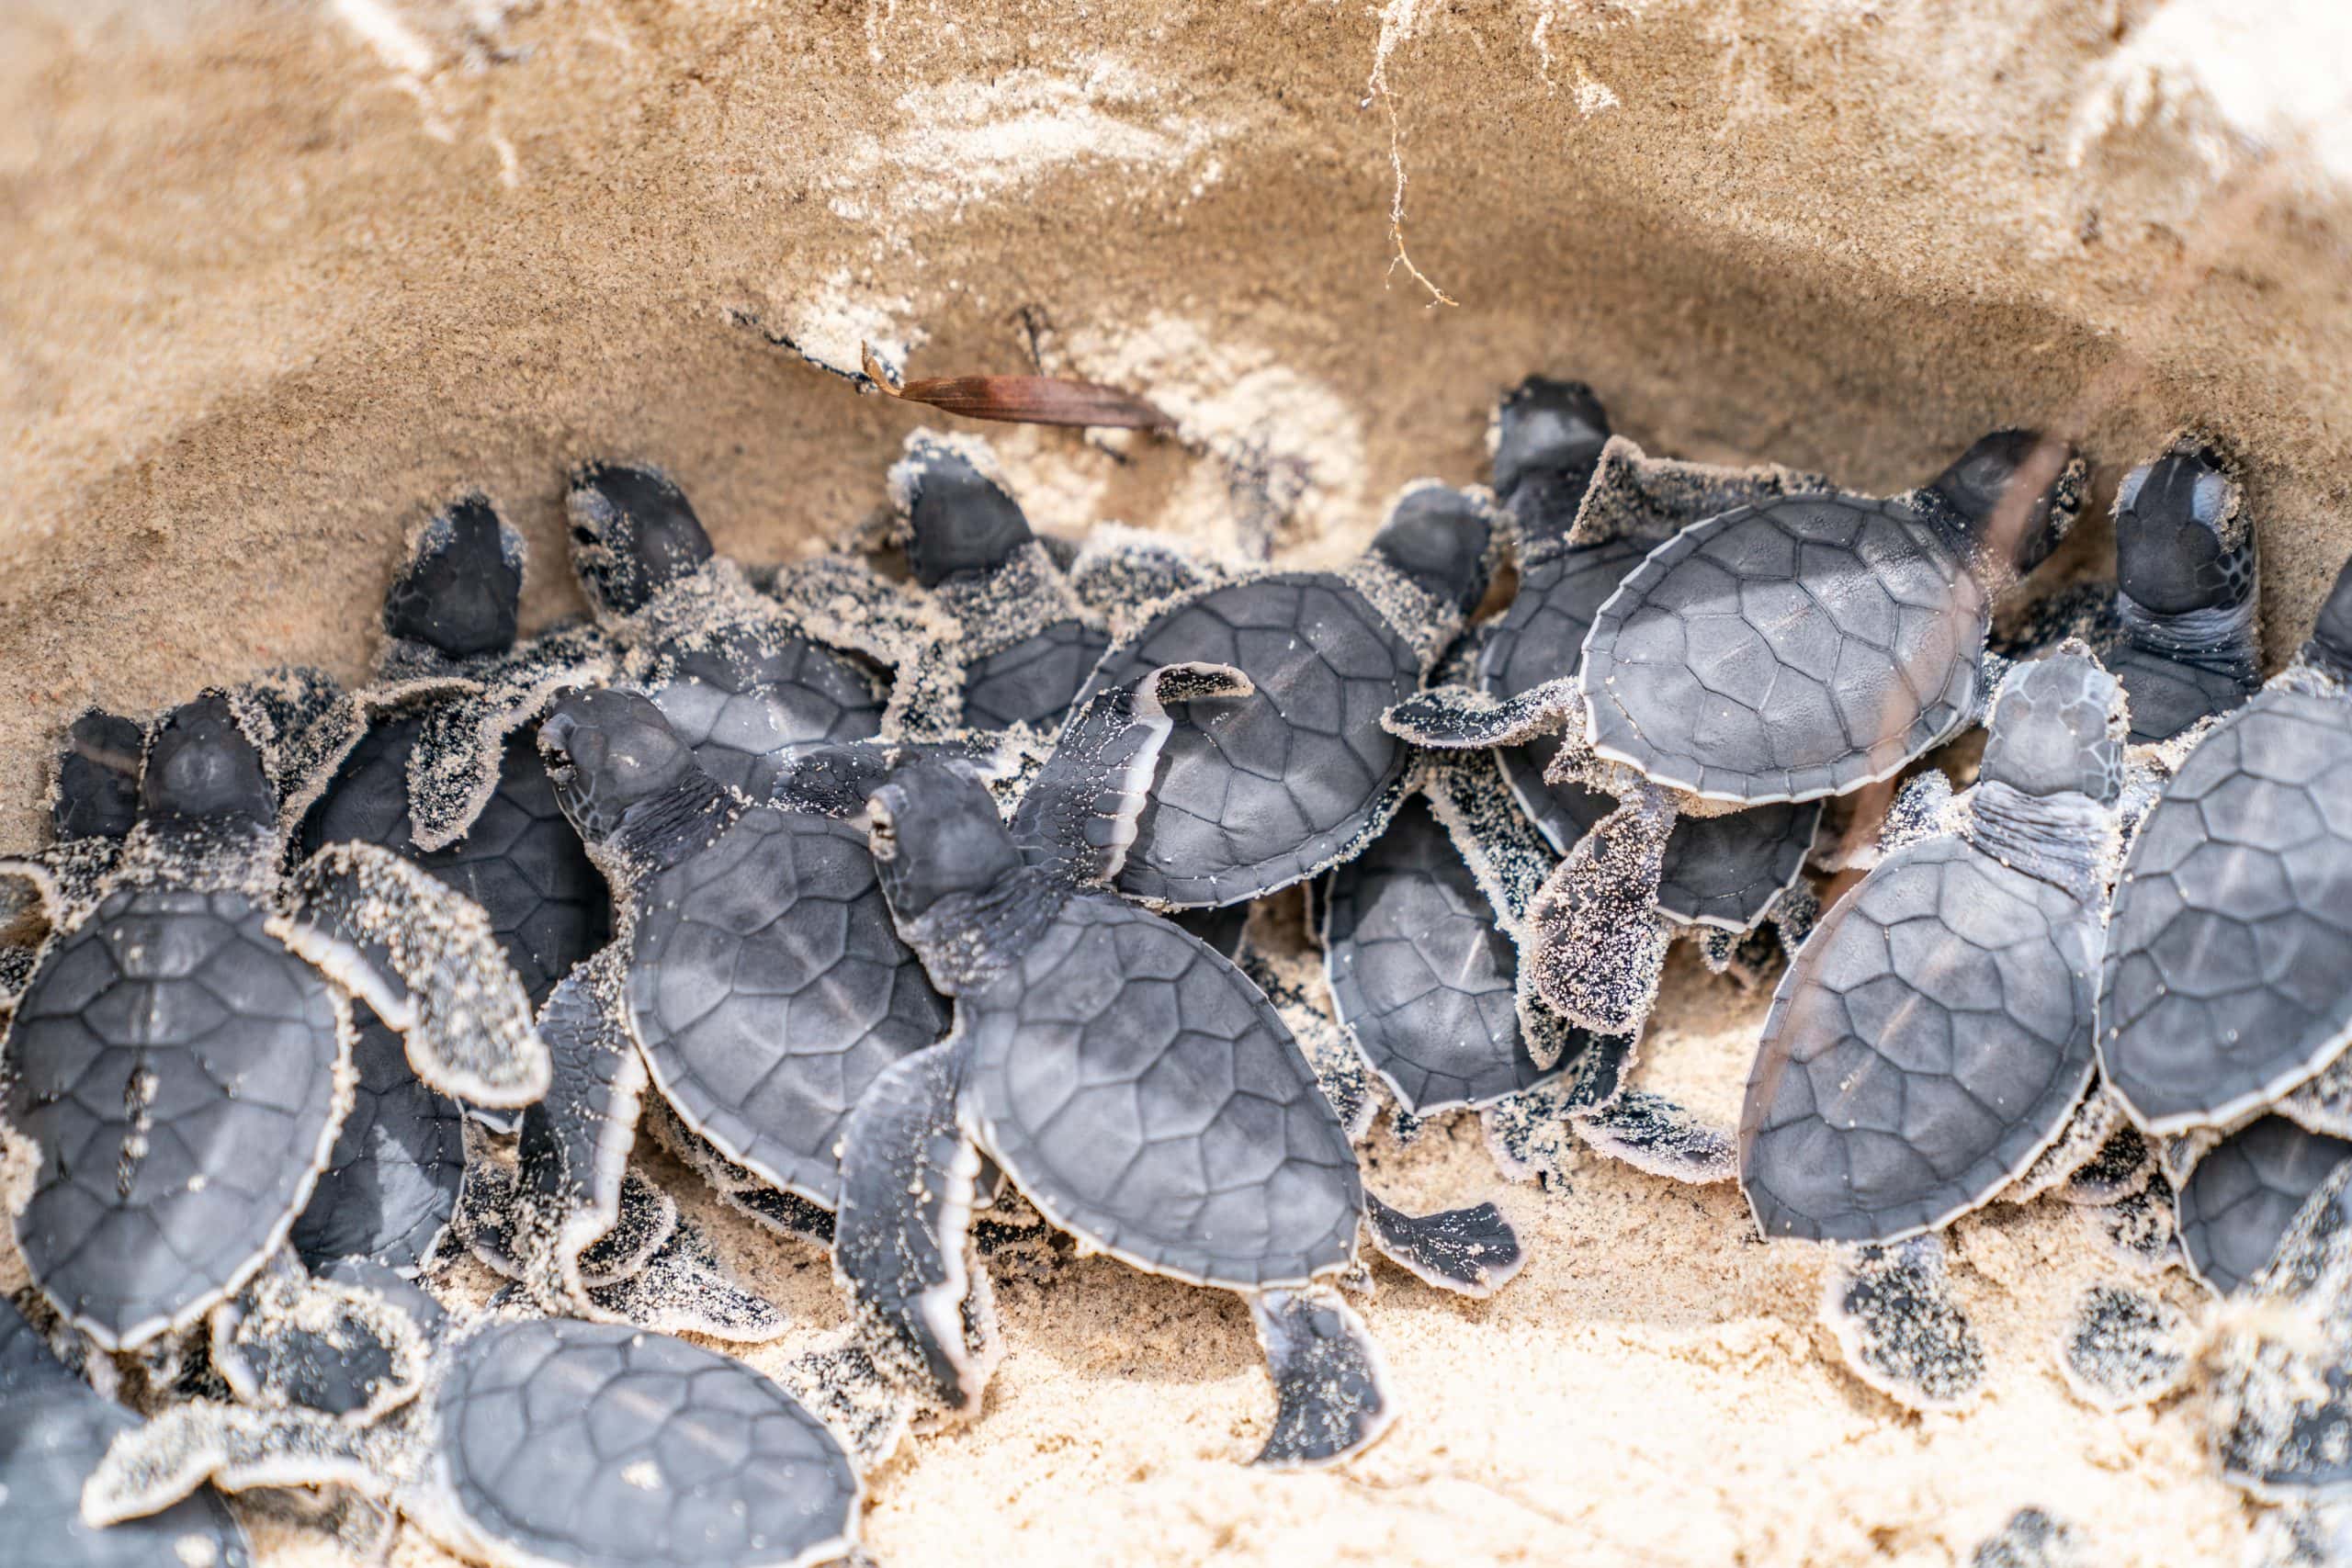 Baby turtle hatchlings in nest